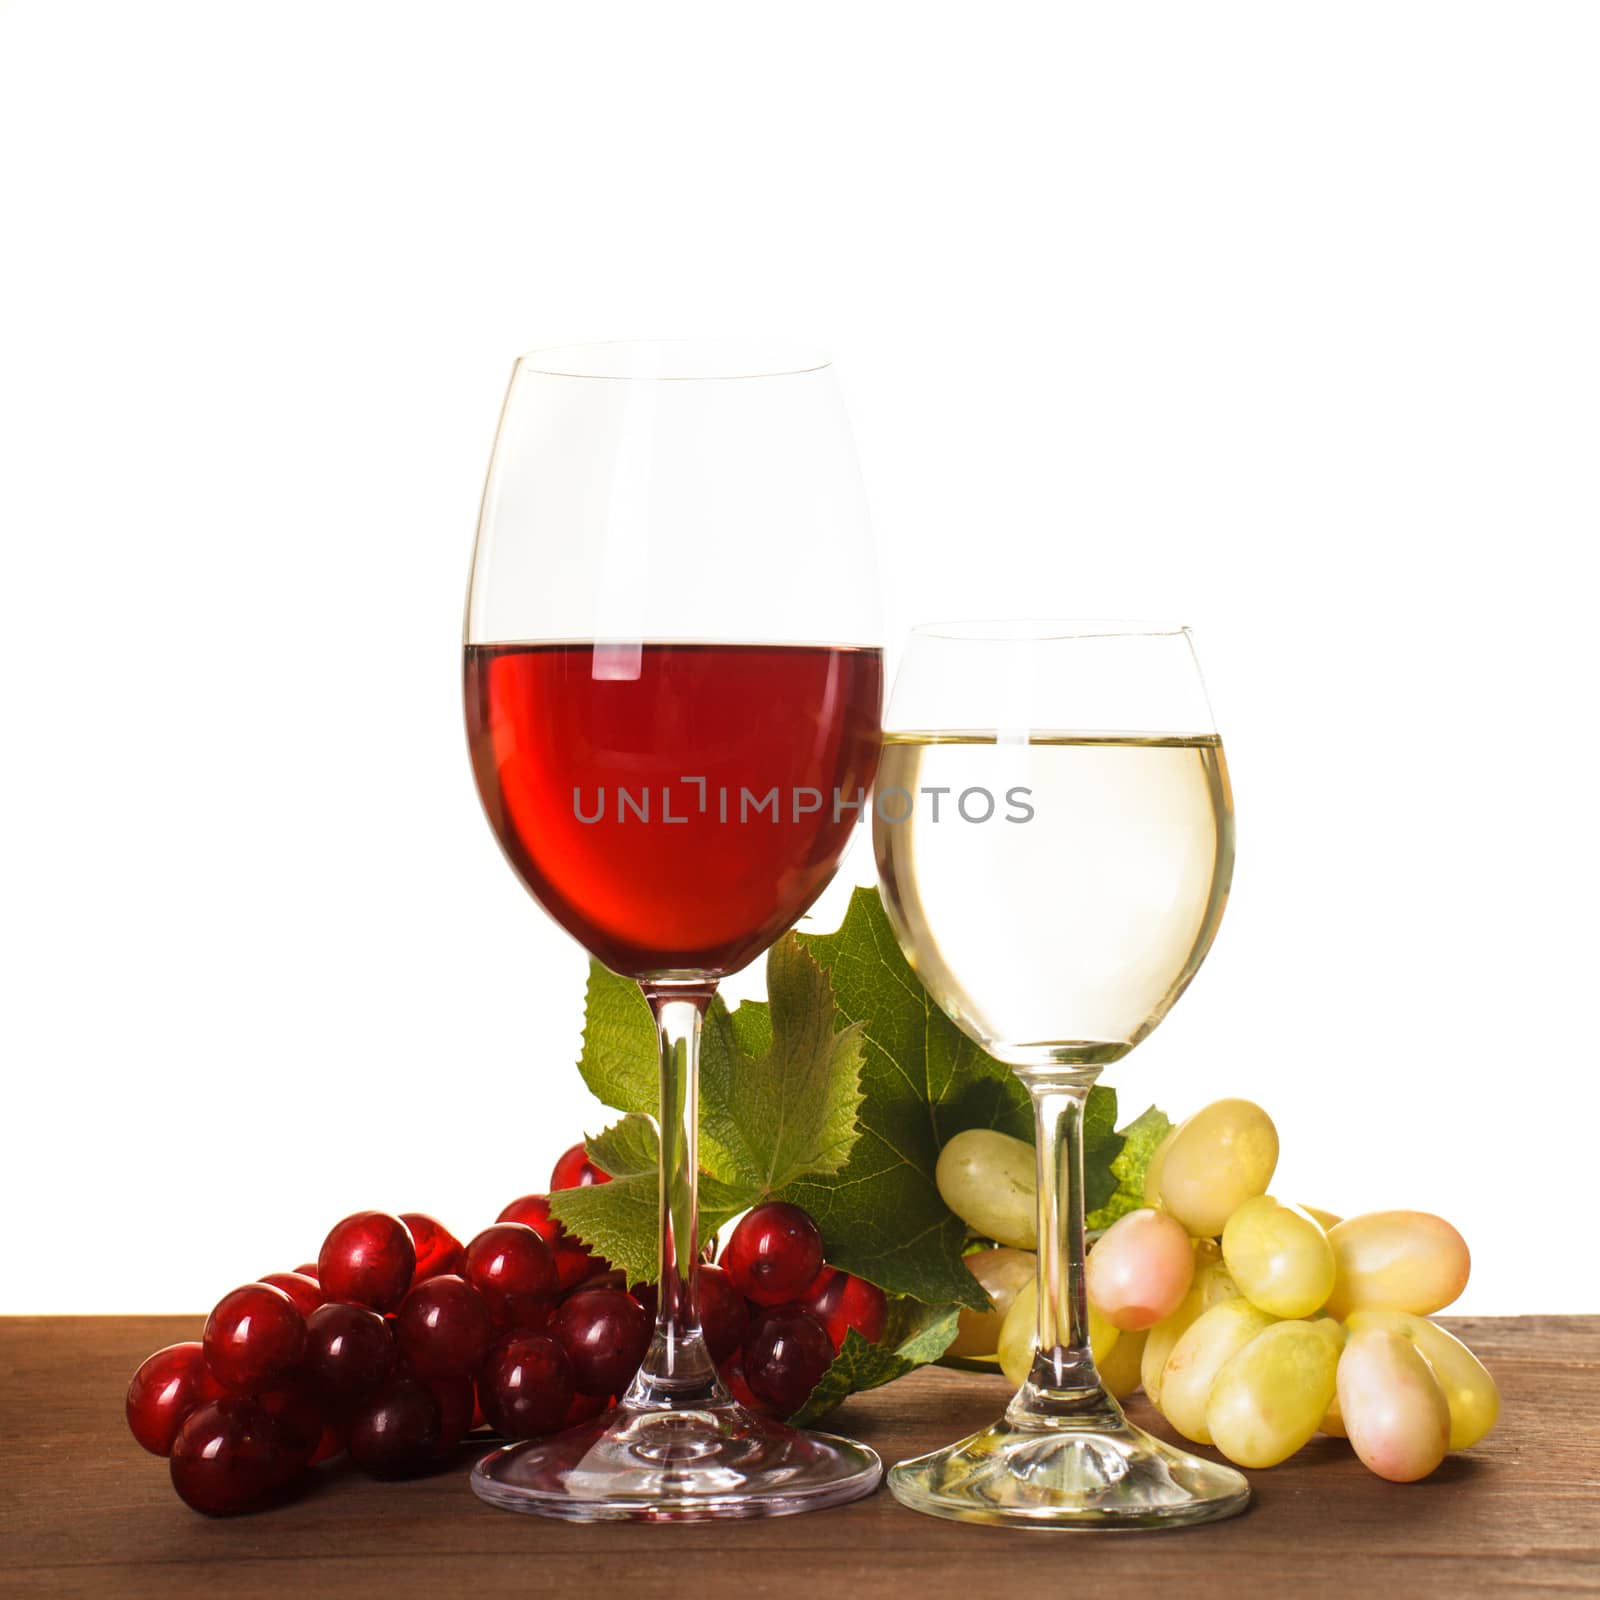 Red and white wine in glass over wooden table